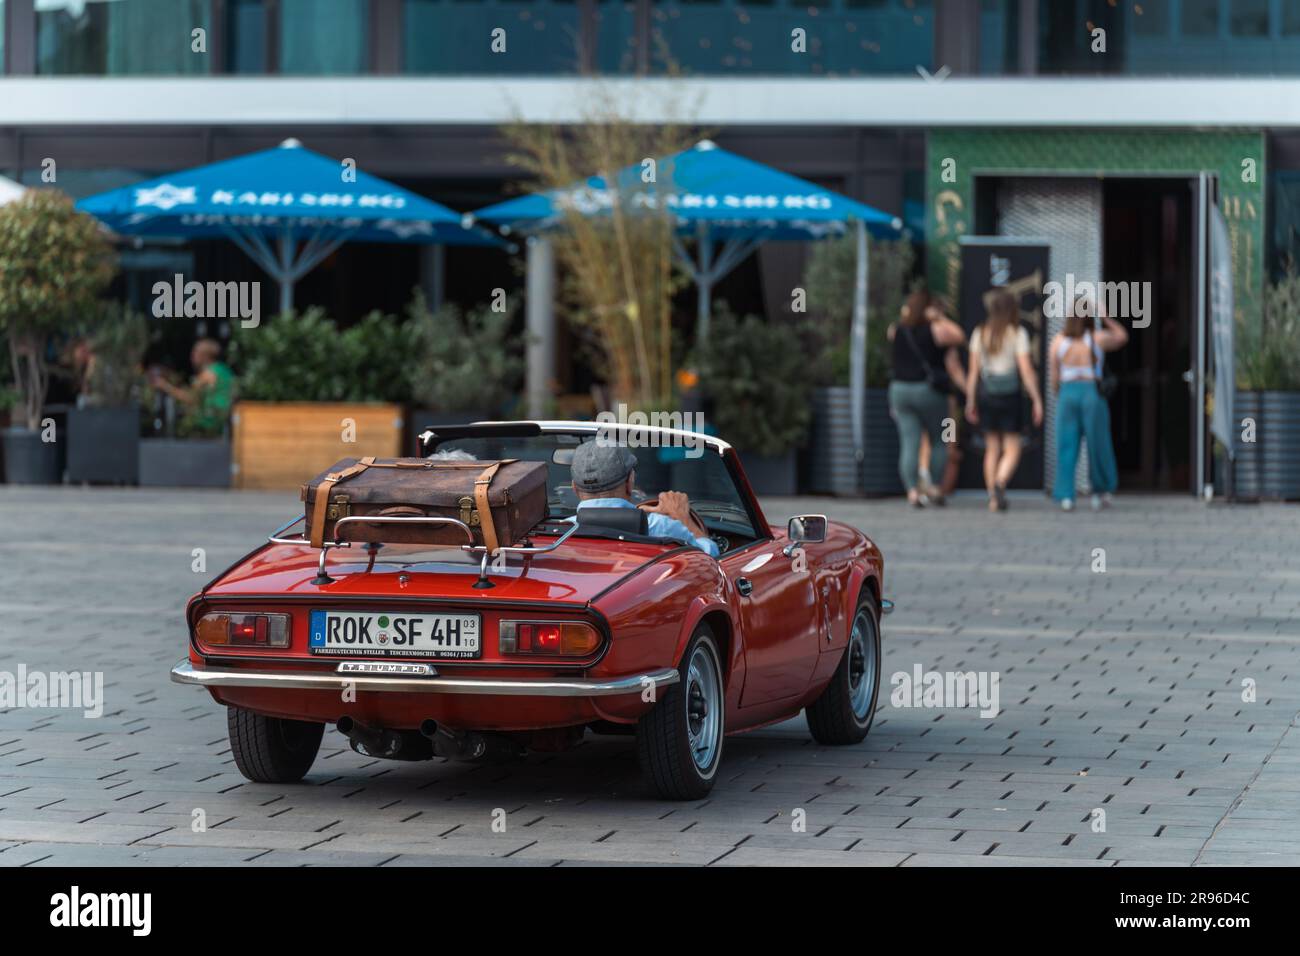 Kaiserslautern, Germany. 24th June, 2023. 1978 Triumph Spitfire 1500 arriving at Stiftsplatz (Square) after finished rallye. The 15th Kaiserslautern Classics combines a vintage car show with the former ADAC Trifels Historic rallye (now under the new 'ADAC Trifels Oldtimerwanderung' name) and a Vespa meeting. The event starts on Saturday 8:30 AM and continues at various public locations downtown through the day, accompanied by live music bands. Credit: Gustav Zygmund/Alamy News Stock Photo